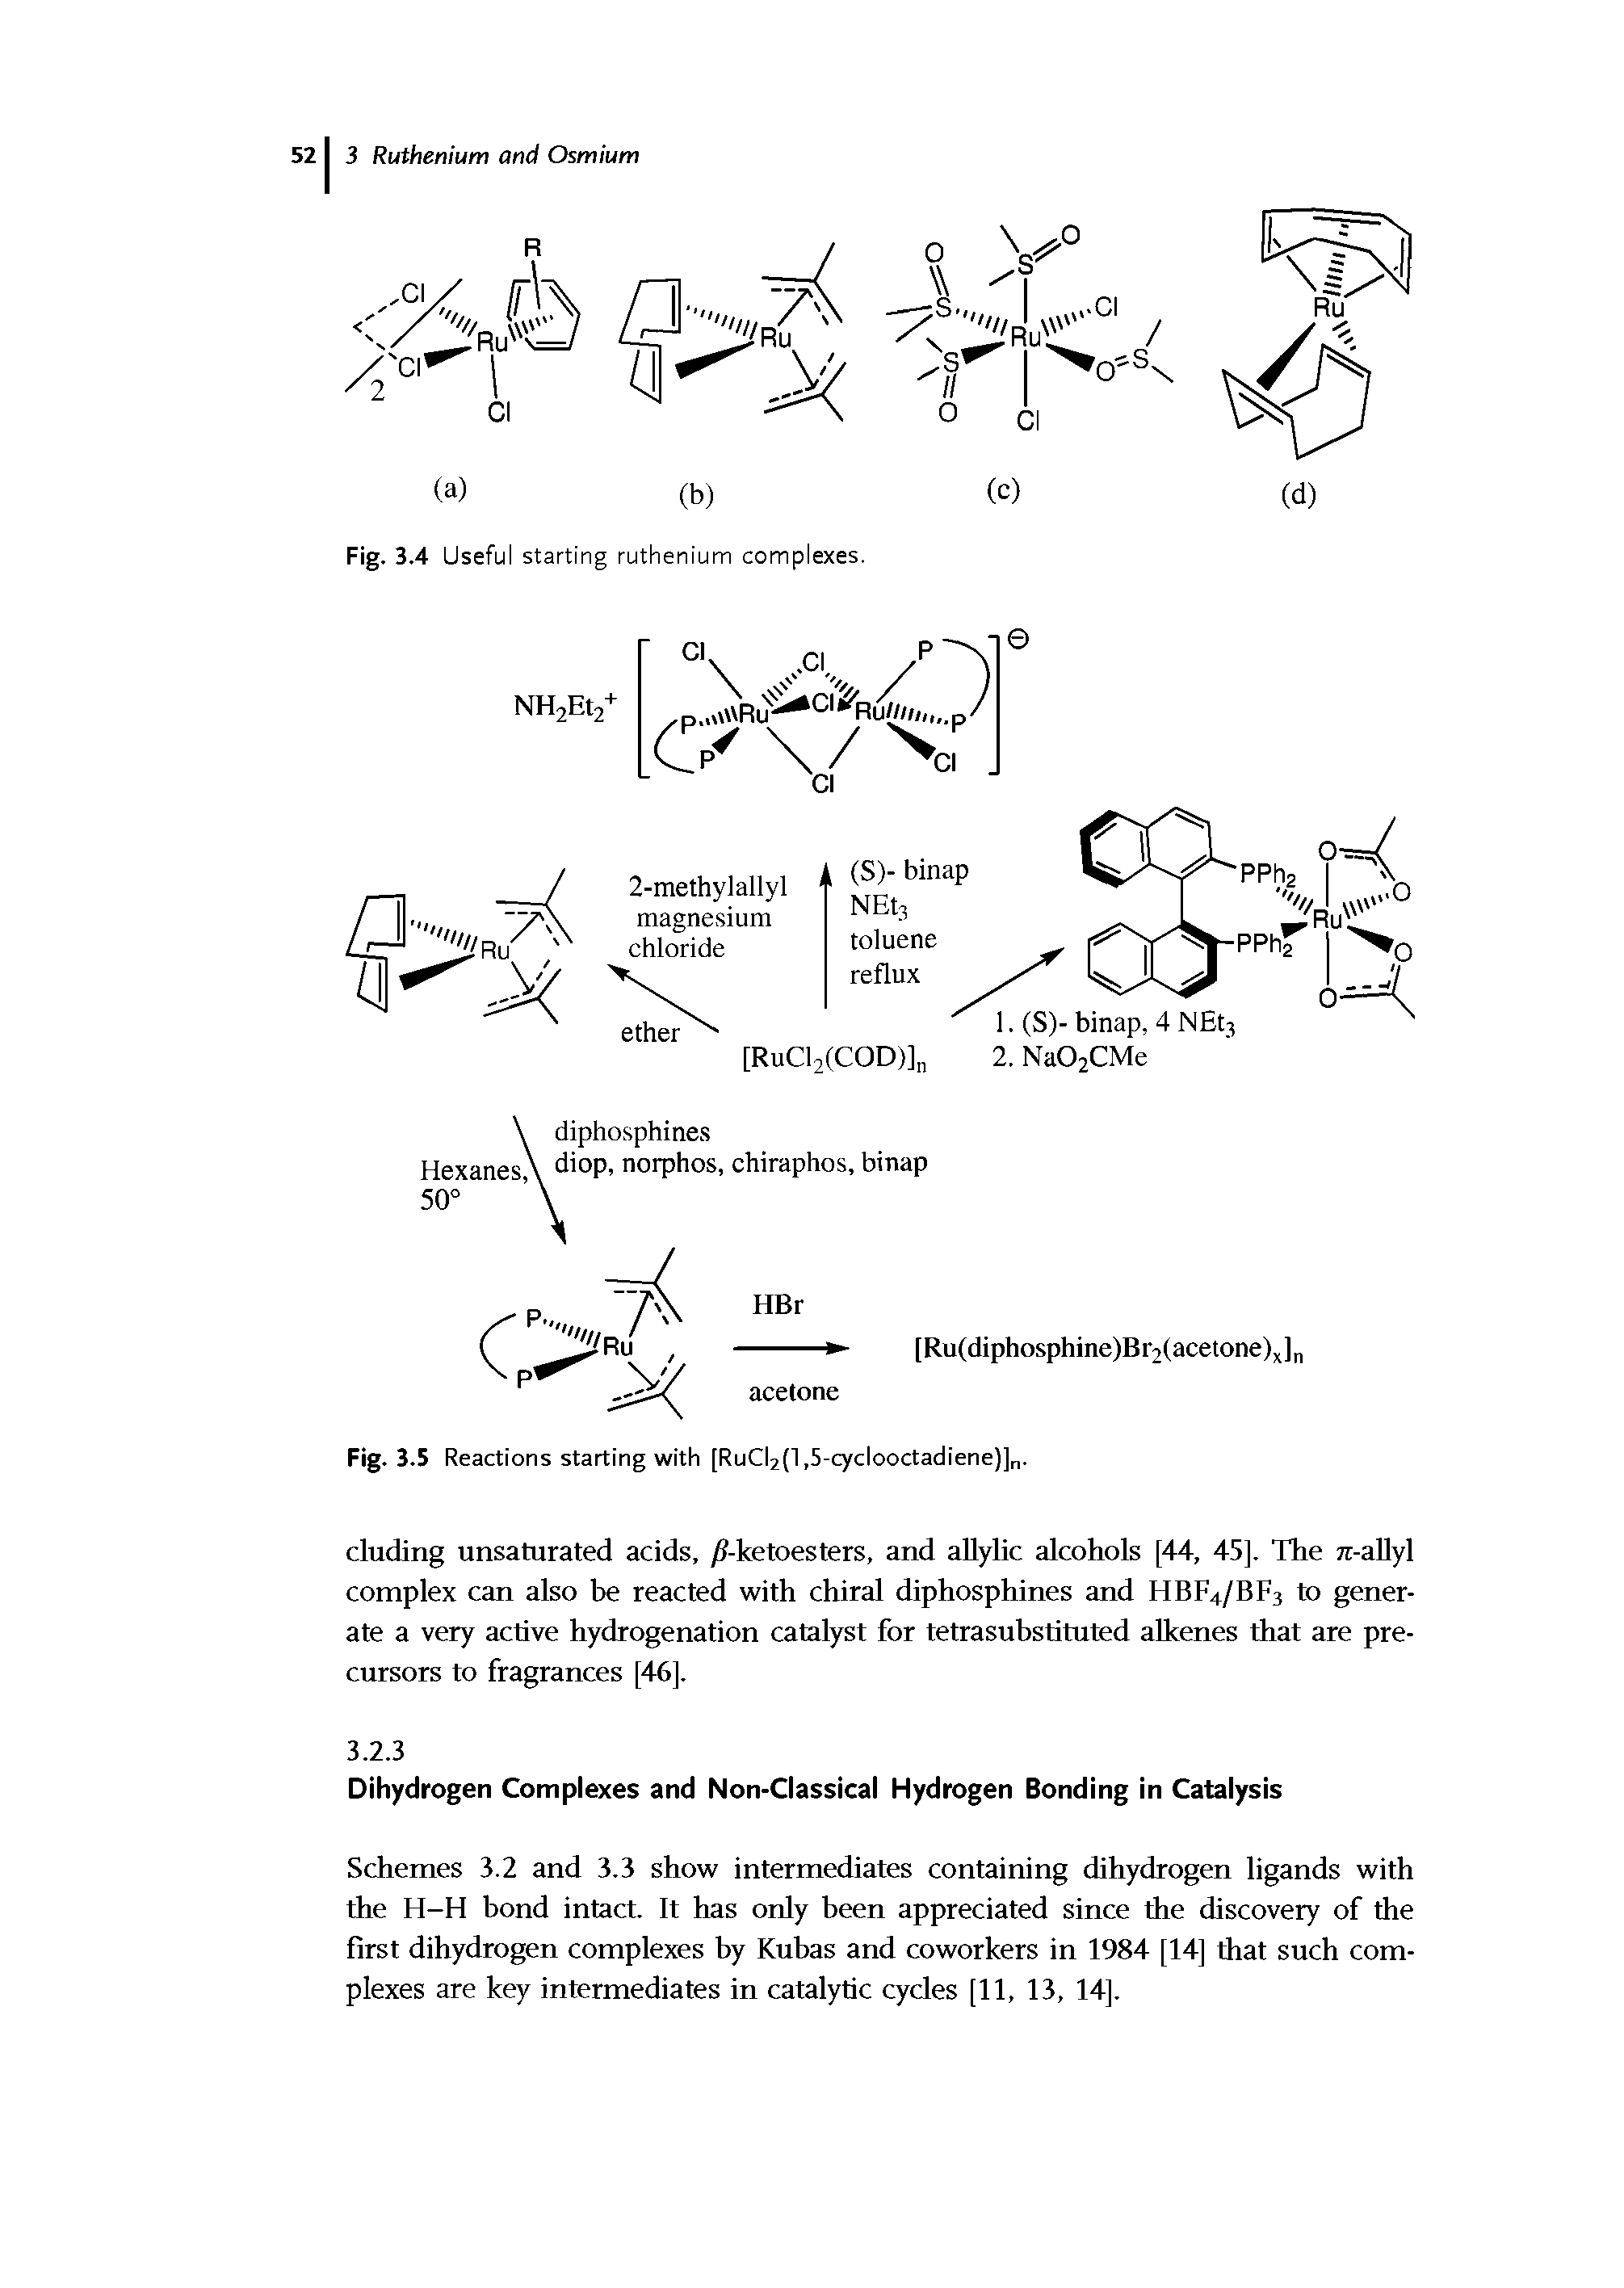 Schemes 3.2 and 3.3 show intermediates containing dihydrogen ligands with the H-H bond intact. It has only been appreciated since the discovery of the first dihydrogen complexes by Kubas and coworkers in 1984 [14] that such complexes are key intermediates in catalytic cycles [11, 13, 14].